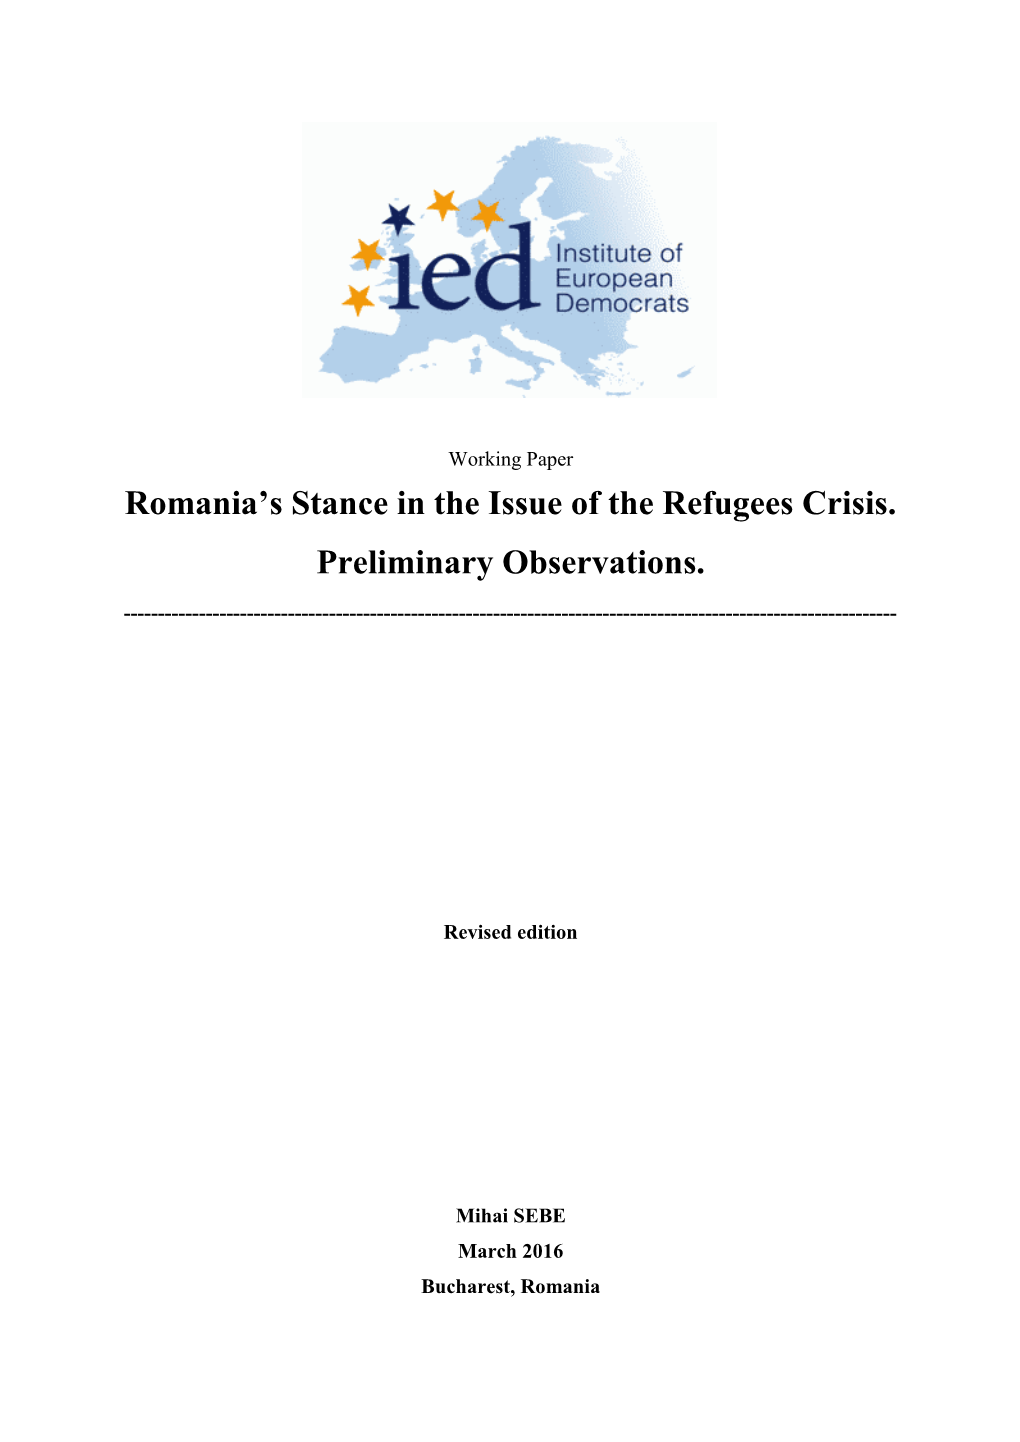 Romania's Stance in the Issue of the Refugees Crisis. Preliminary